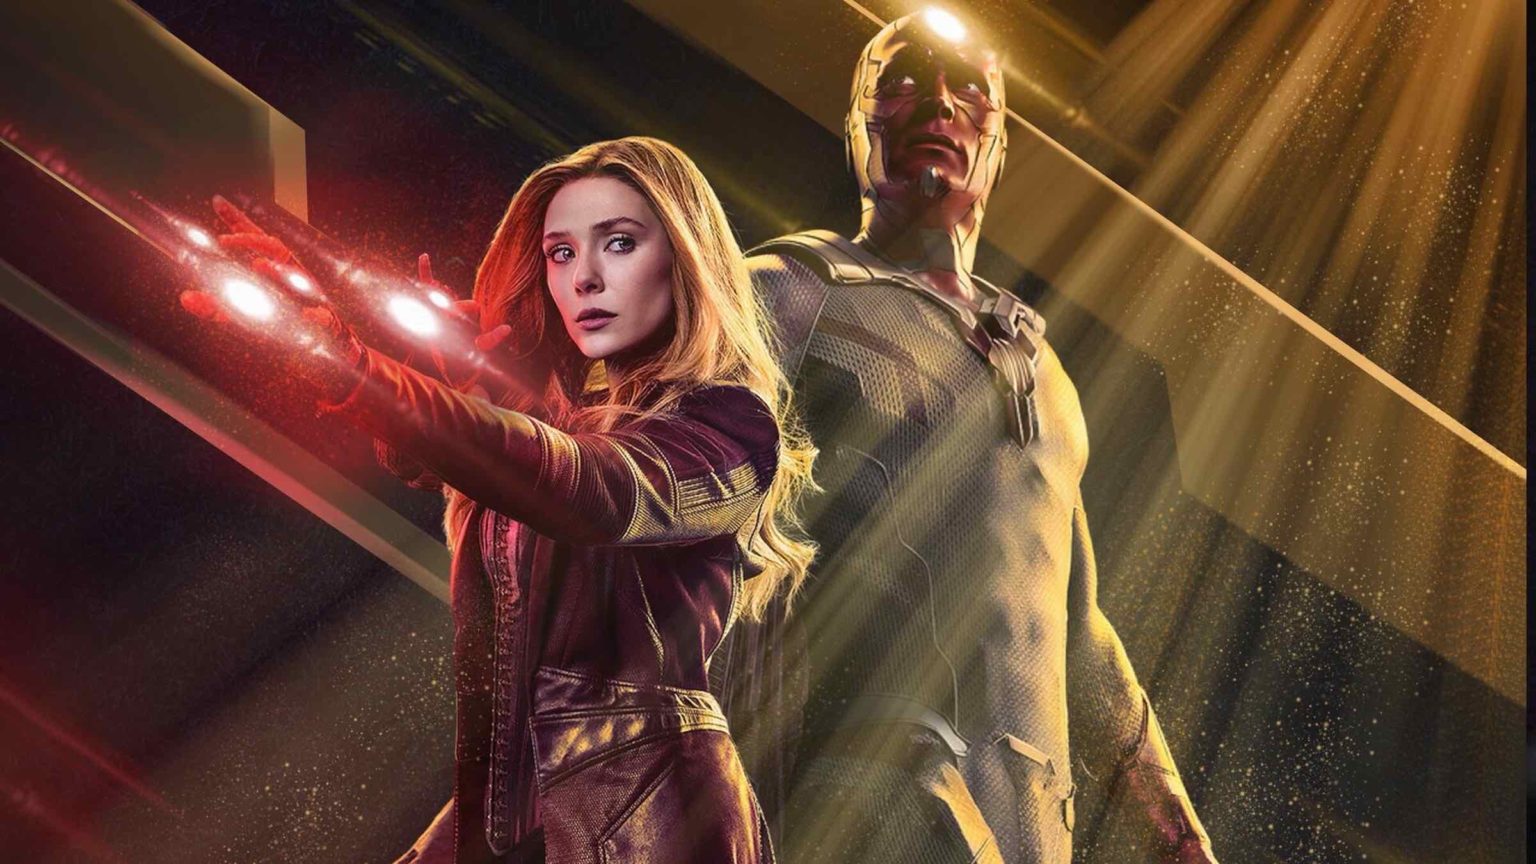 Disney+ dropped an ad at the Super Bowl. With it, everyone is talking about the upcoming MCU show 'WandaVision'. Here's what we know.